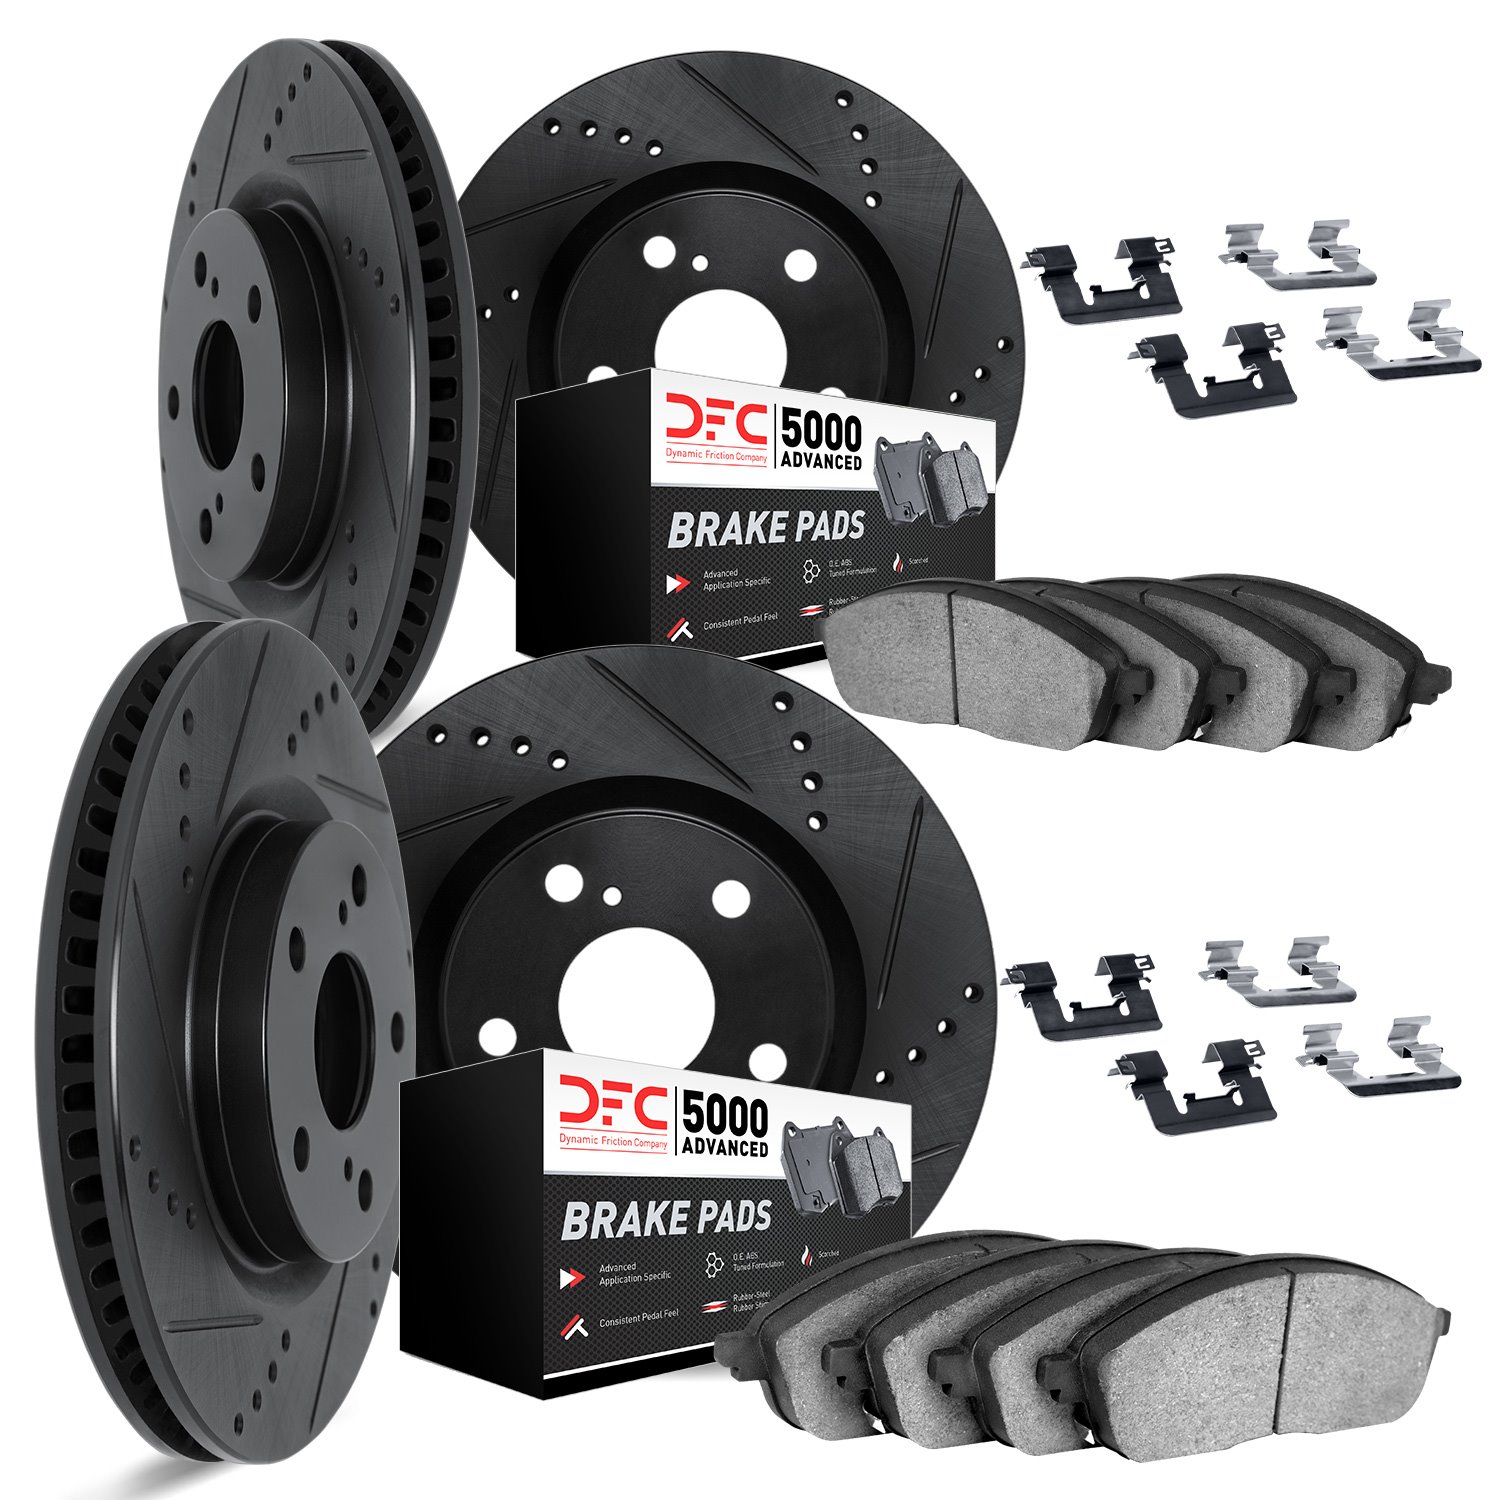 8514-13018 Drilled/Slotted Brake Rotors w/5000 Advanced Brake Pads Kit & Hardware [Black], Fits Select Subaru, Position: Front a